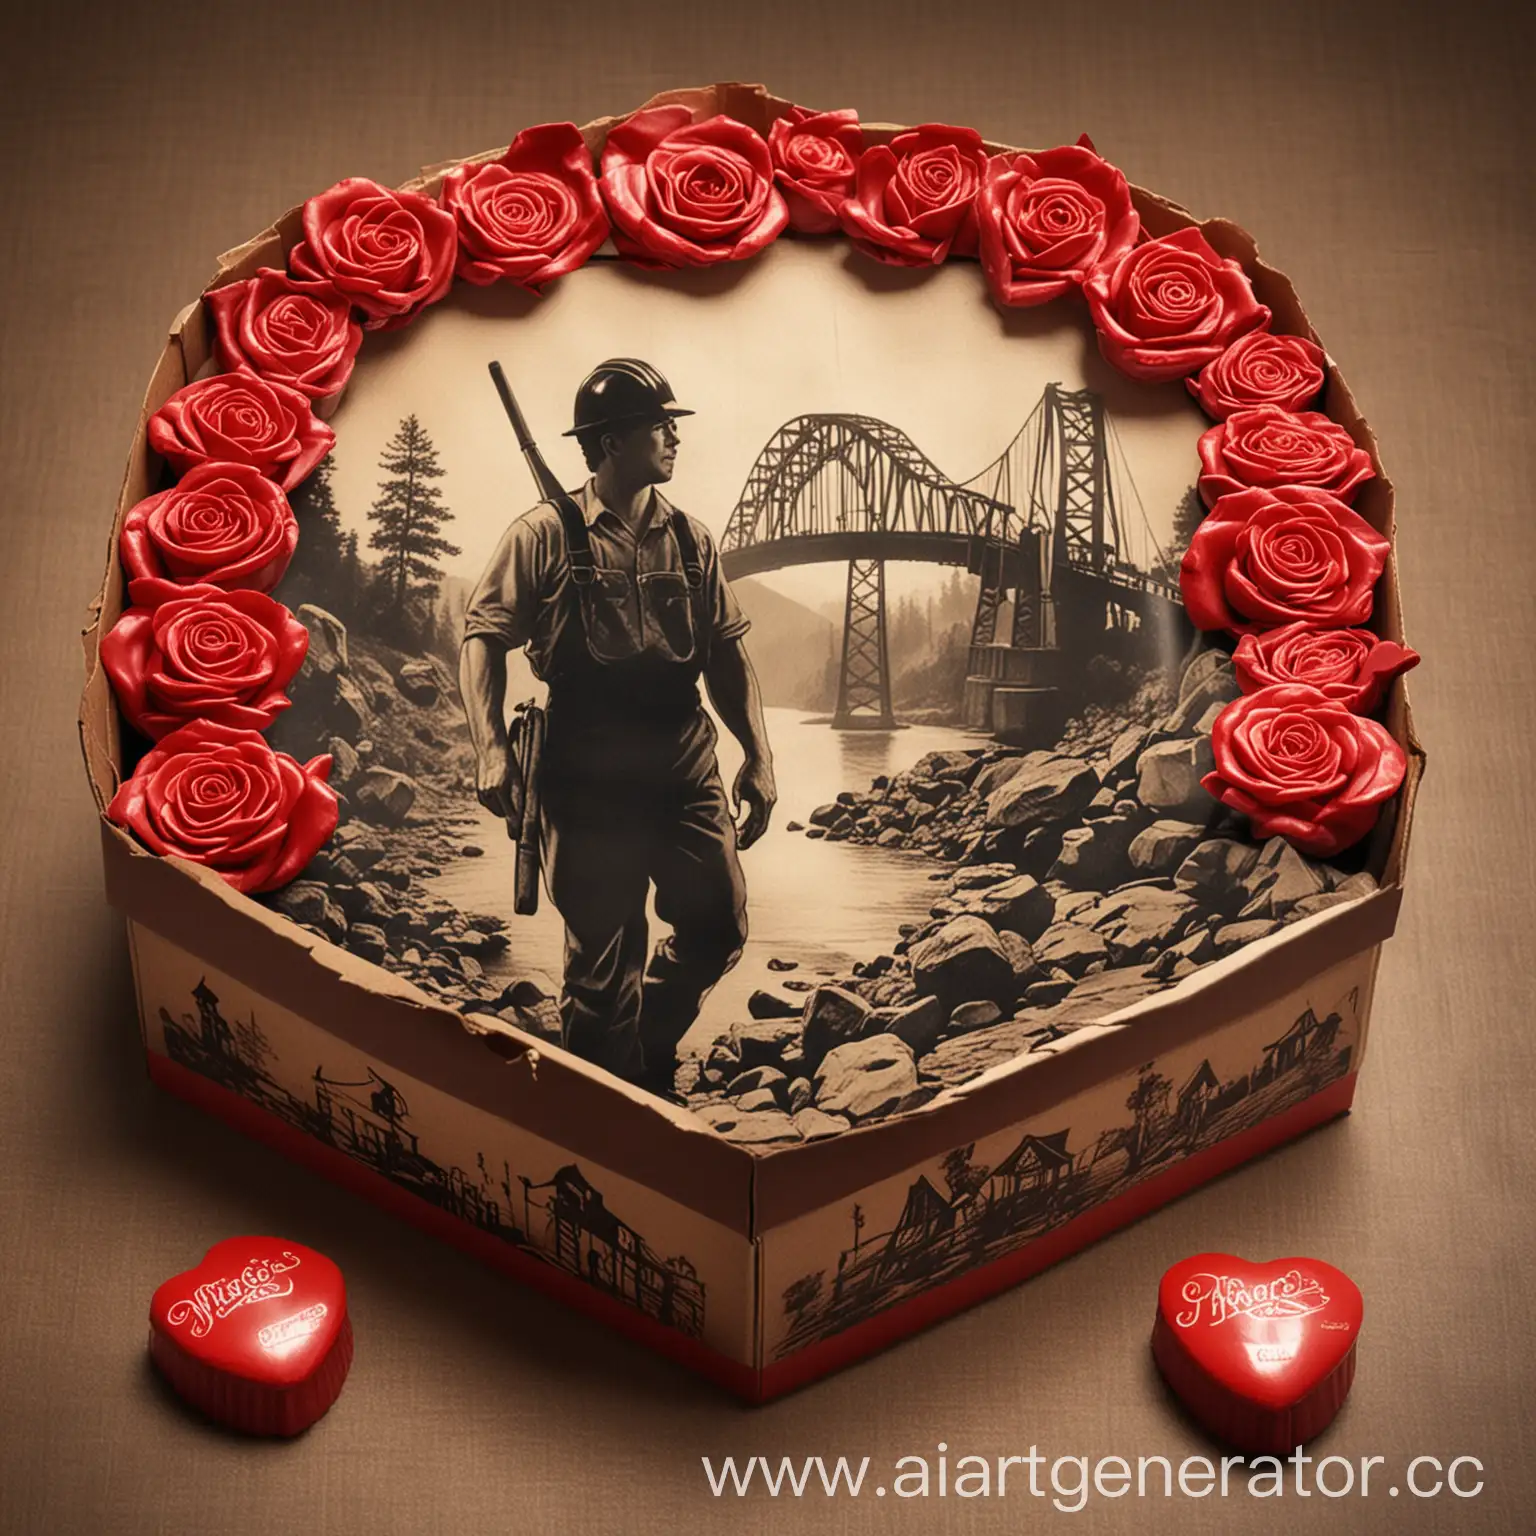 Miners-Day-Candy-Box-with-Miners-Bridge-Silhouette-and-Red-Roses